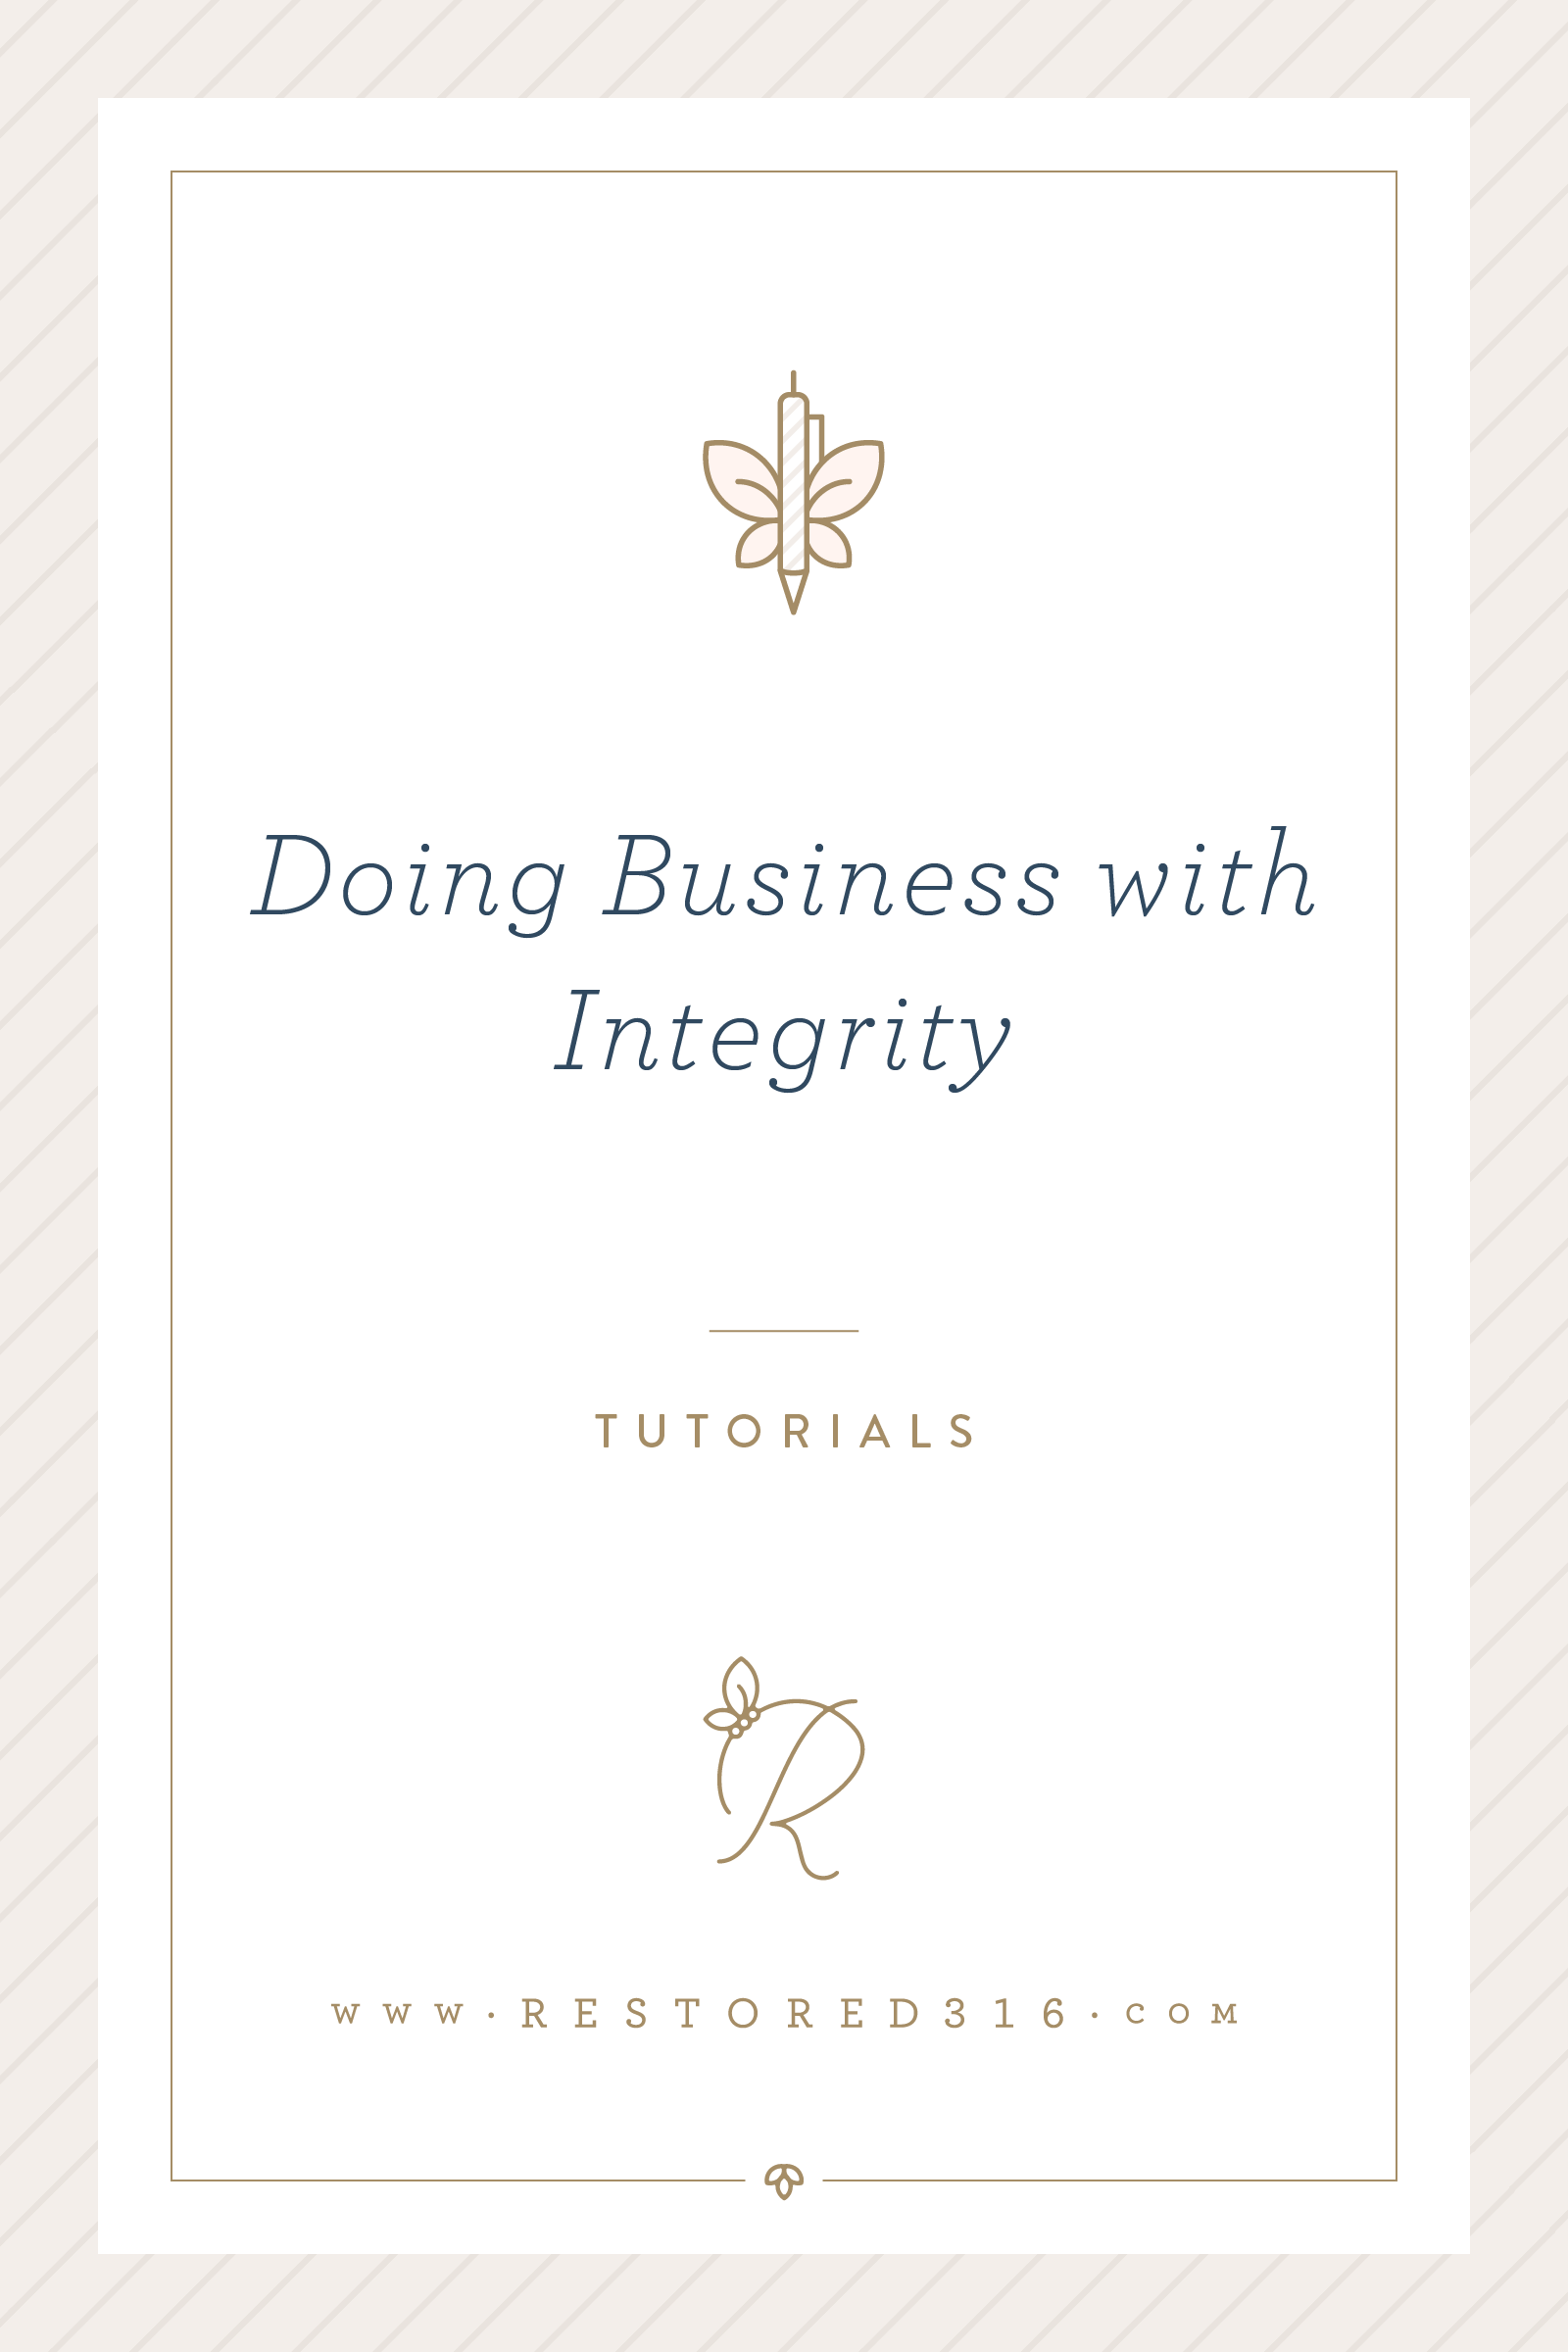 Doing business with integrity